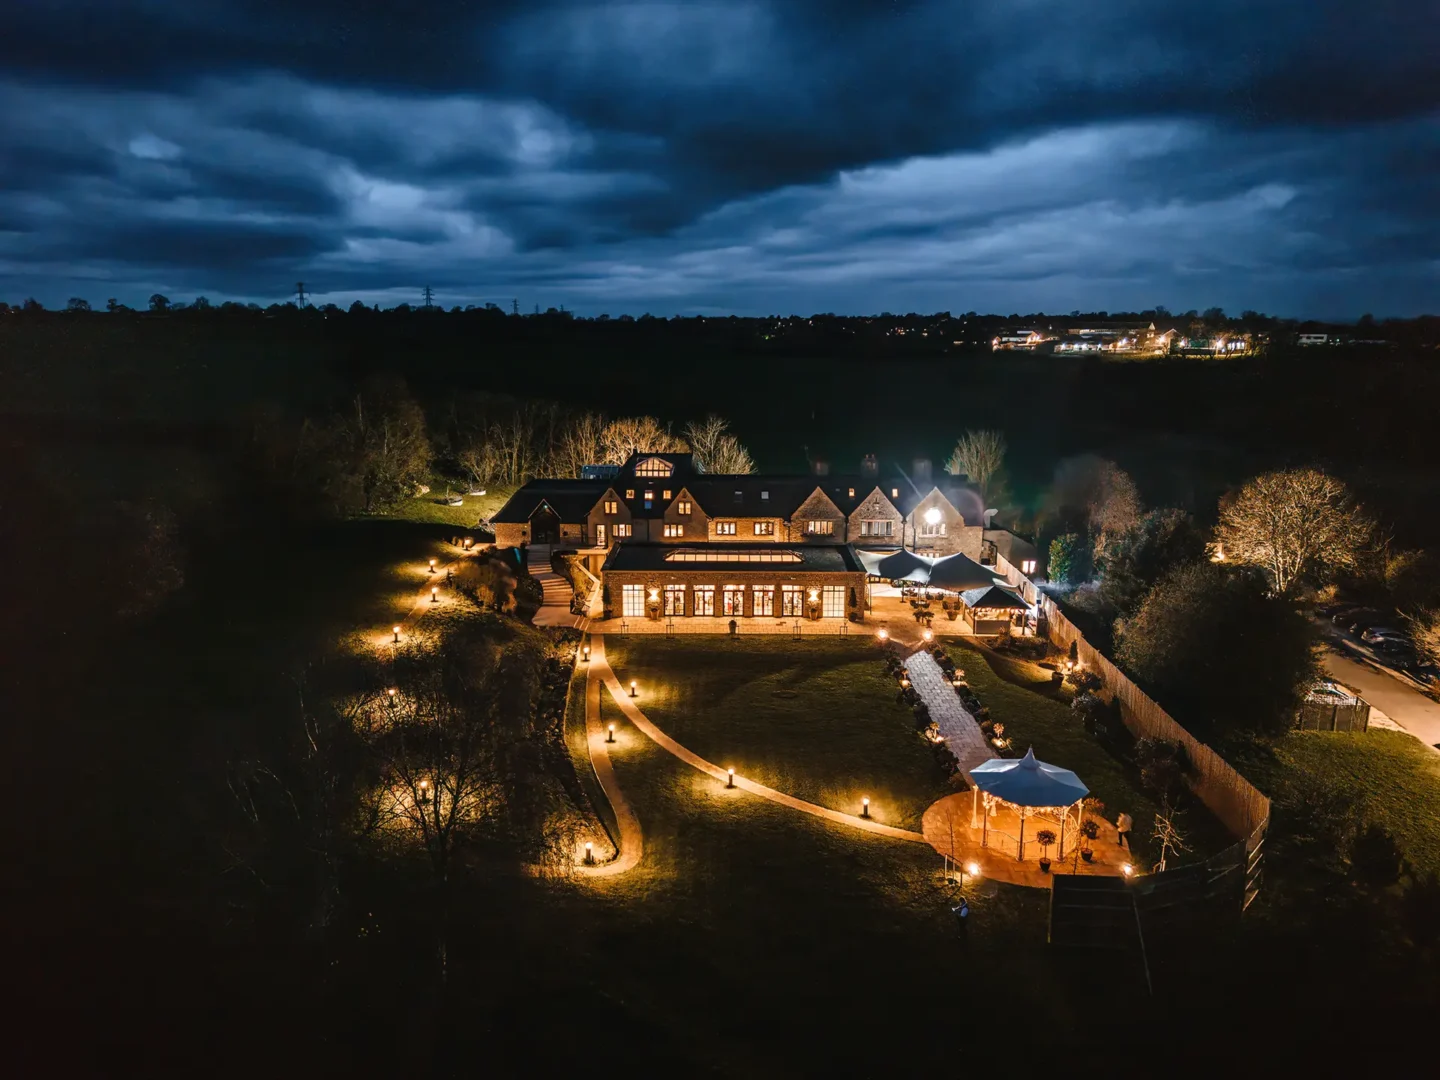 The Pear Tree aerial venue at night